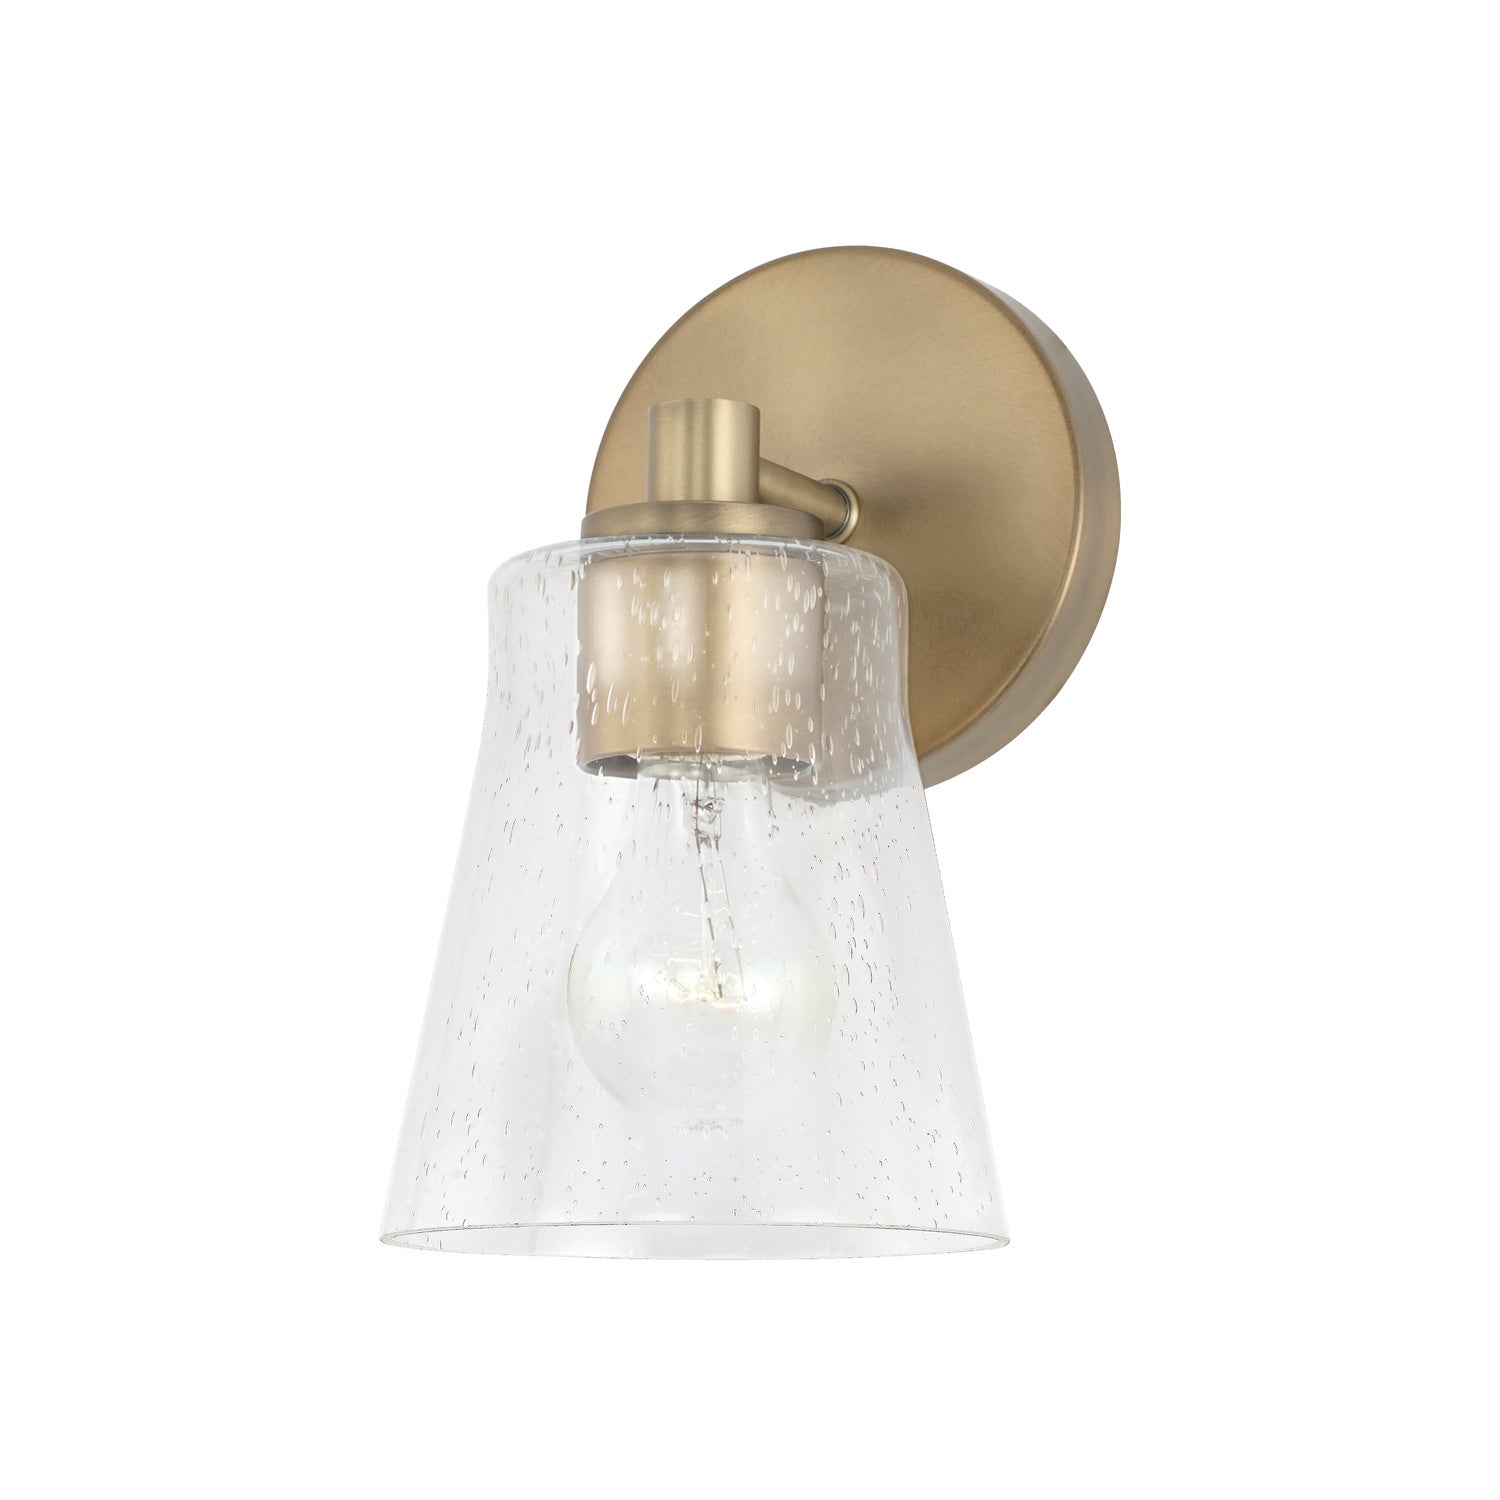 Capital Baker 646911AD-533 Wall Sconce Light - Aged Brass